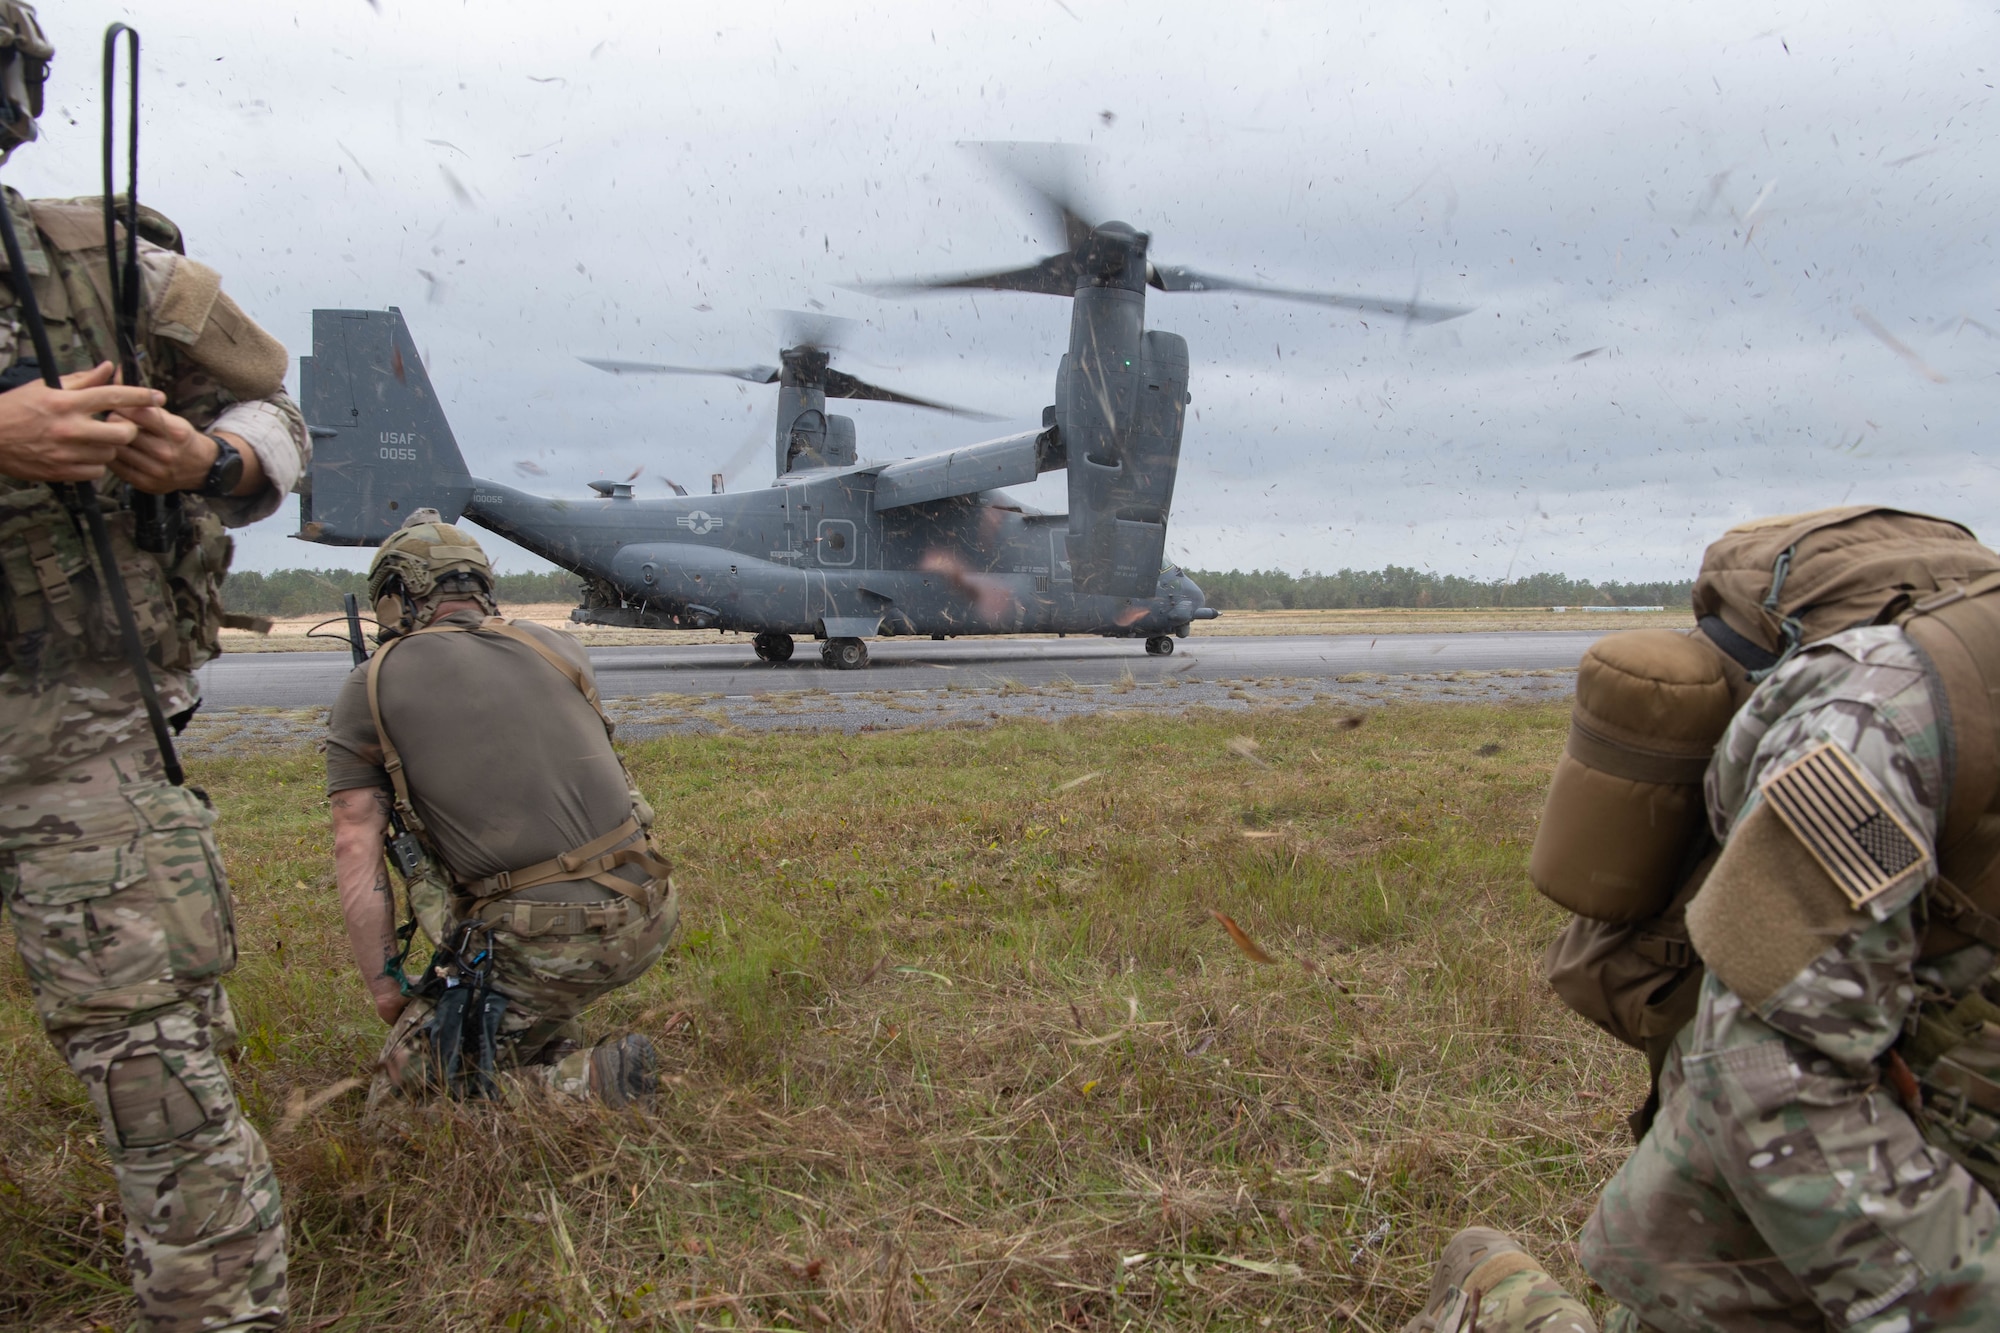 A trio of Special Tactics operators in the foreground brace as a dual-rotor helicopter a 100 feet away spins up its rotors prior to take-off.